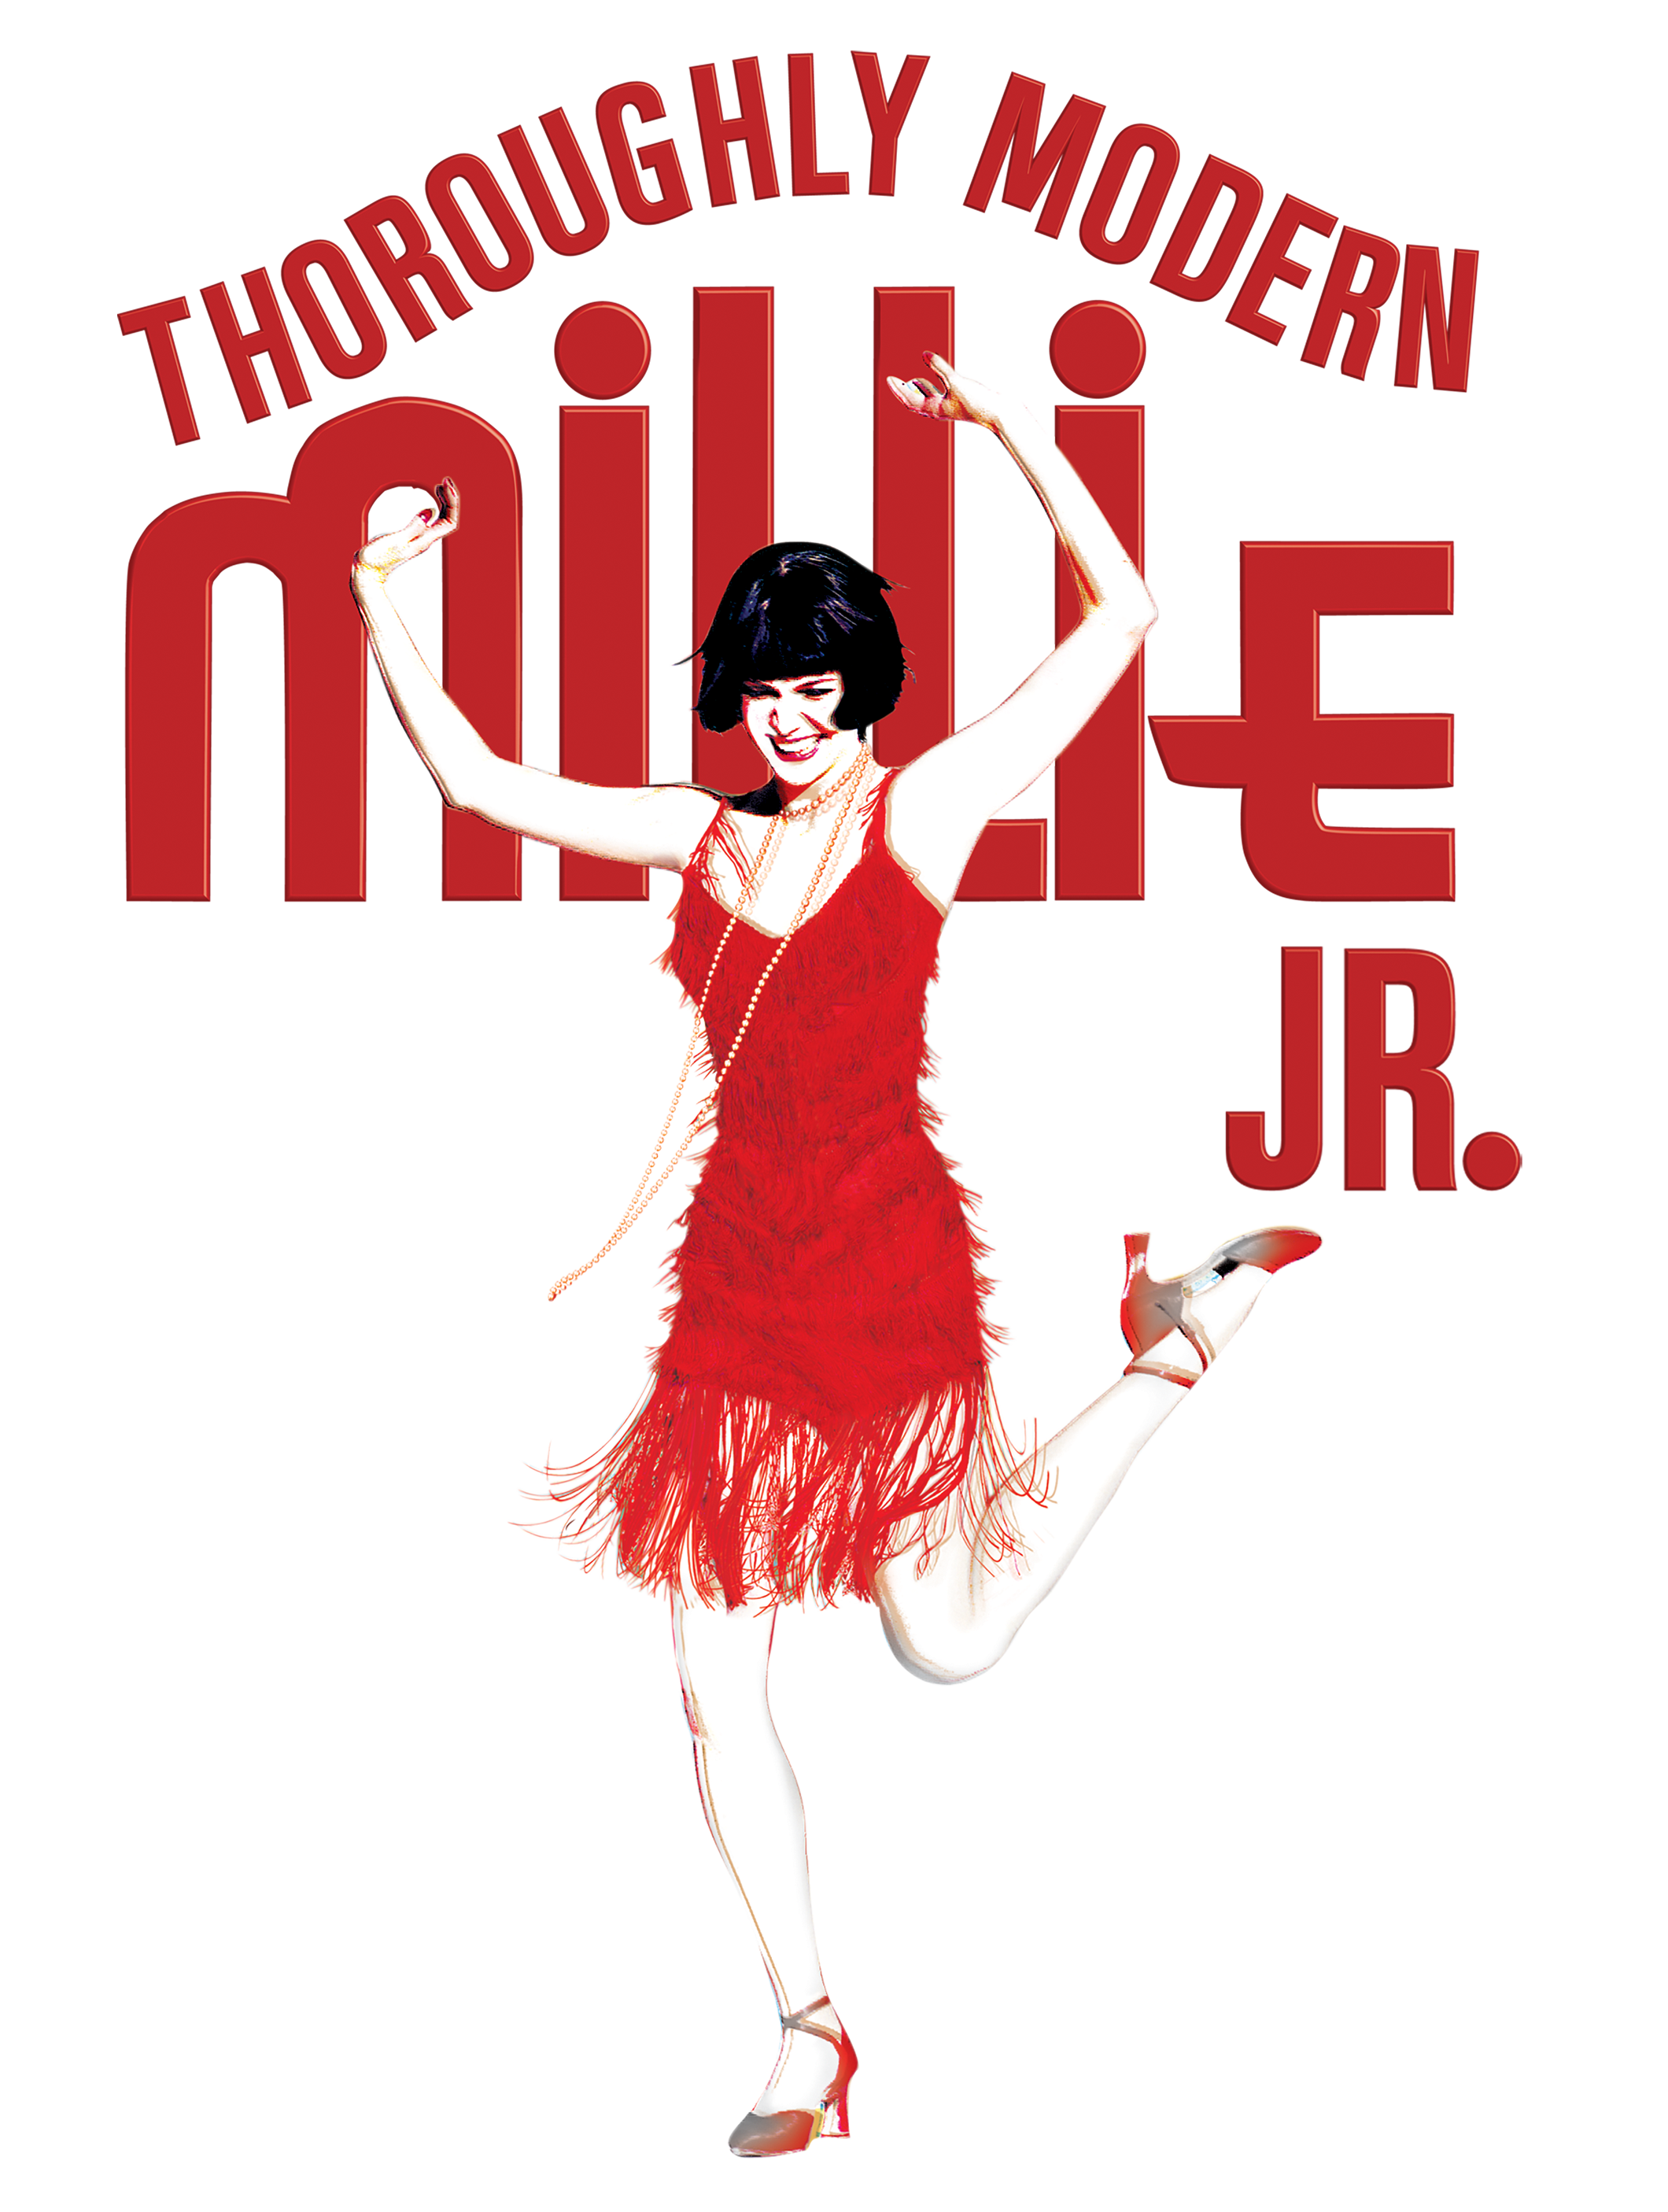 Thoroughly Modern Millie JR. at Katherine L. Albiani Middle School Theatre Company